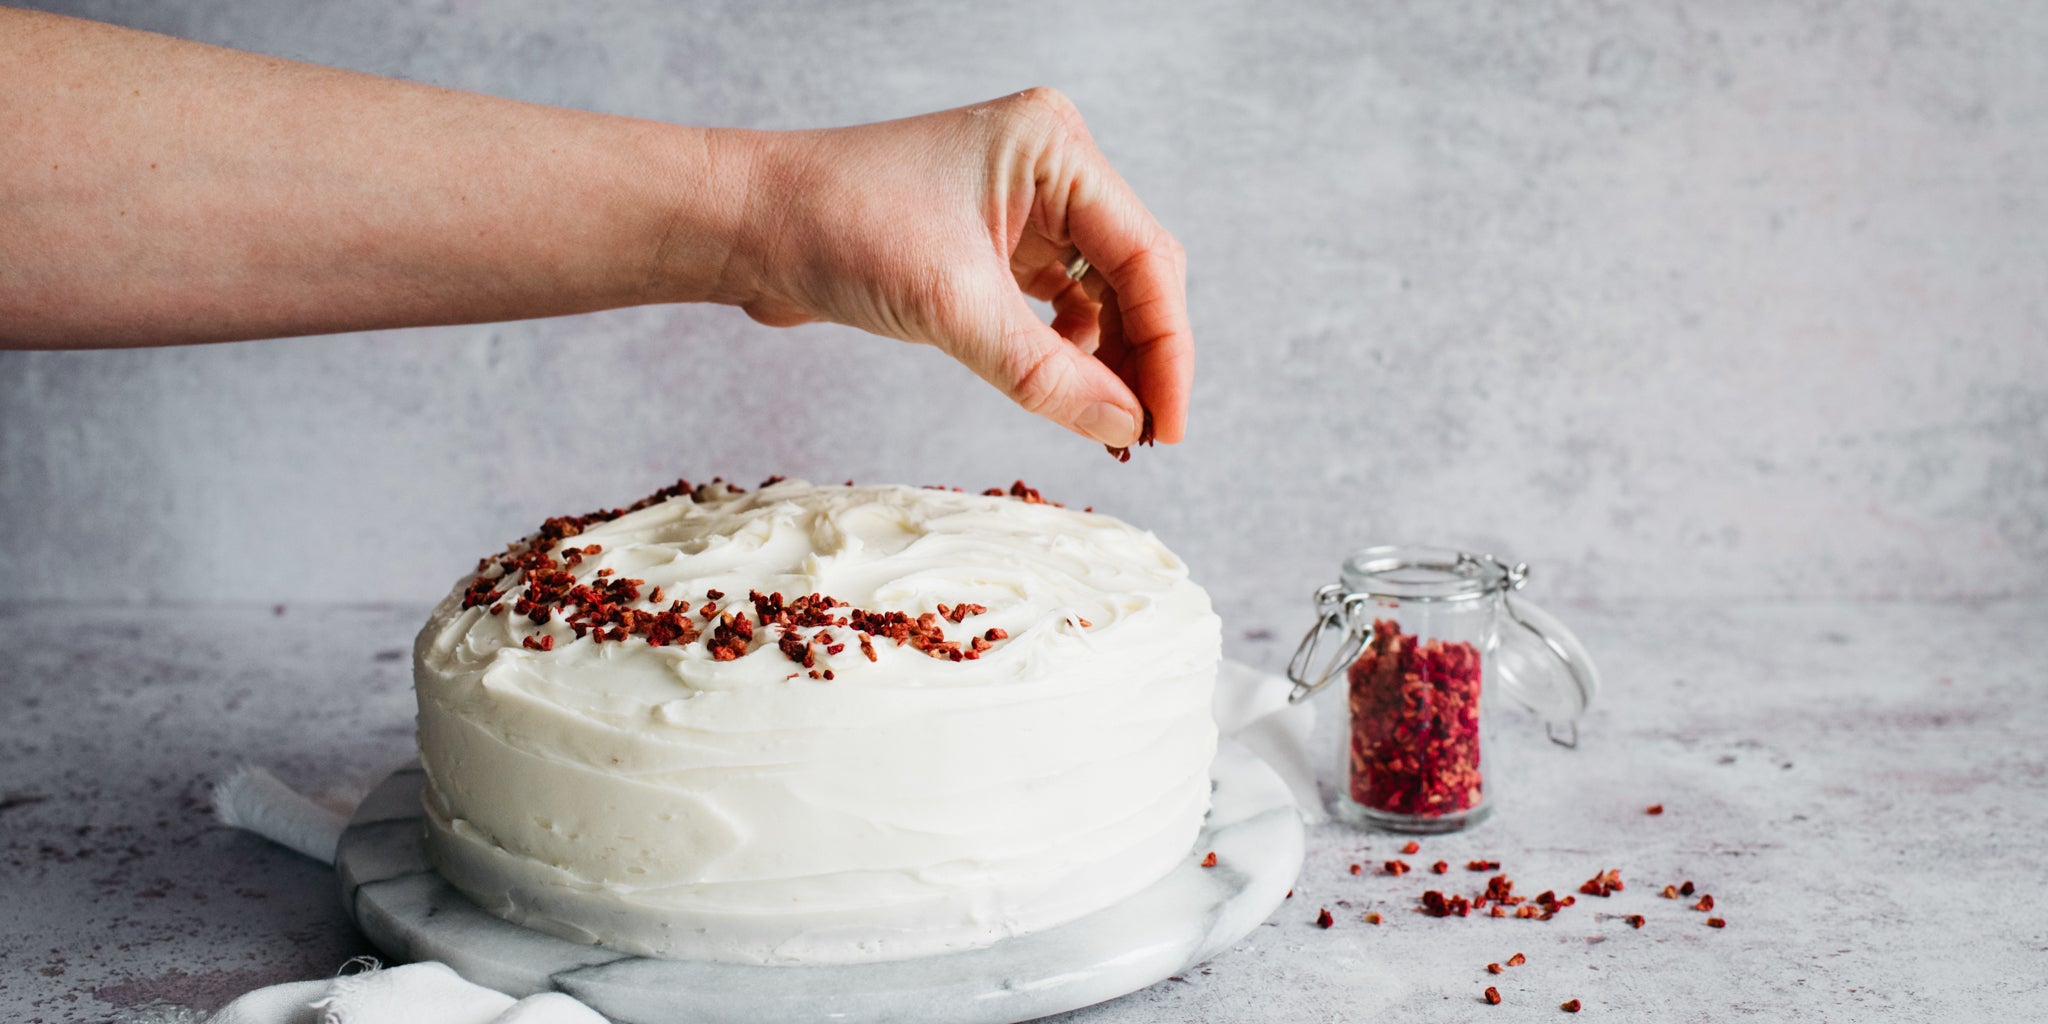 Hands sprinkling decorations on the buttercream icing of a red velvet cake